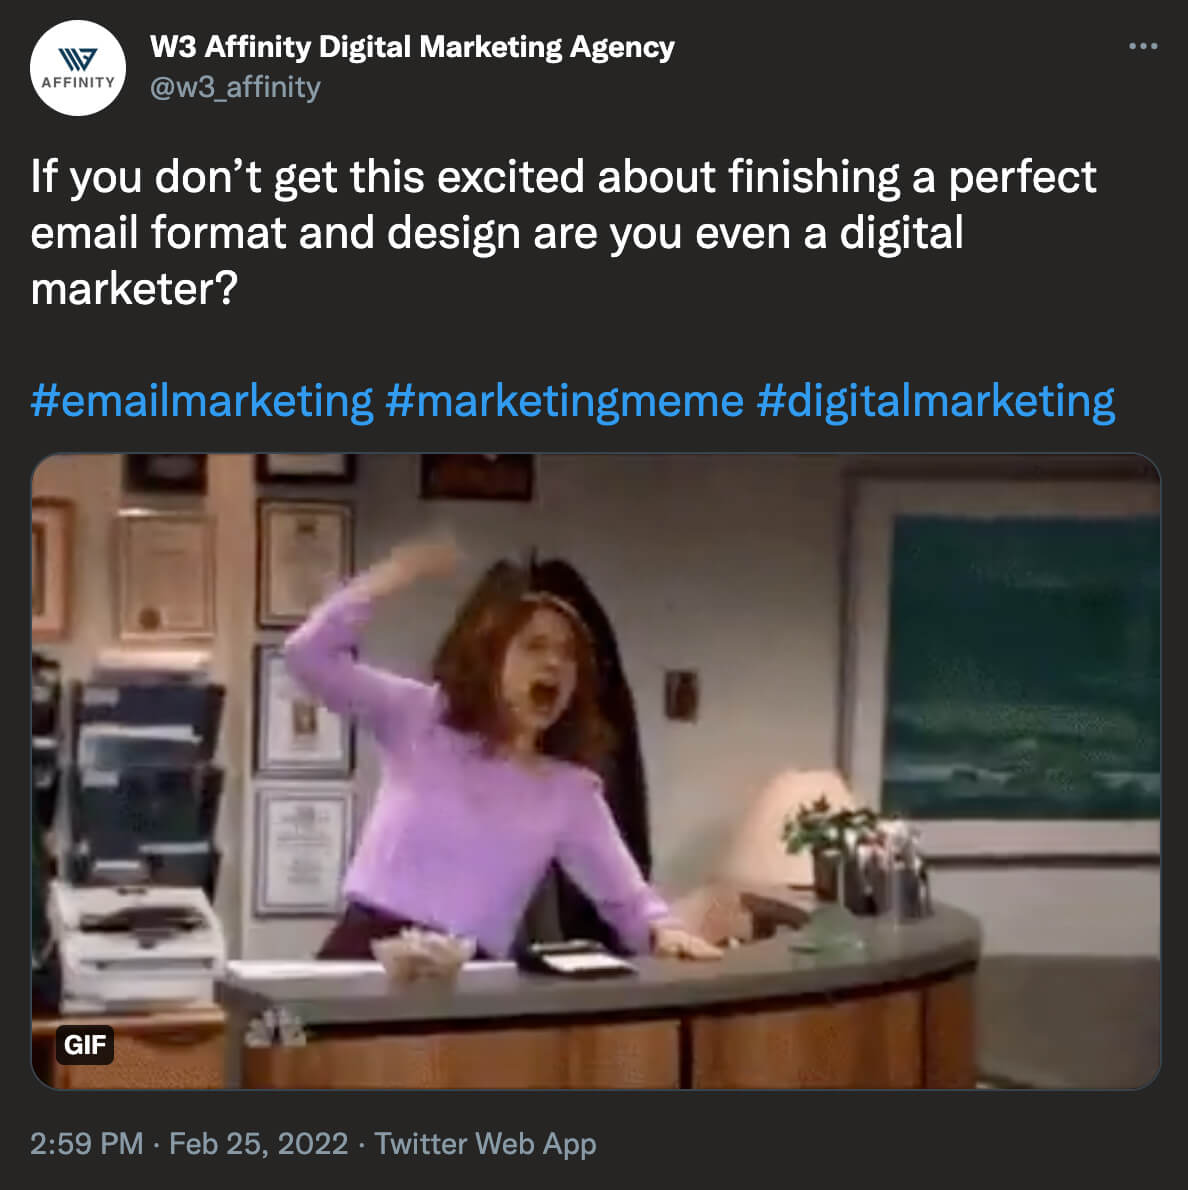 @w3_affinity on twitter: If you don't get this excited about finishing a perfect email format and design are you even a digital marketer?